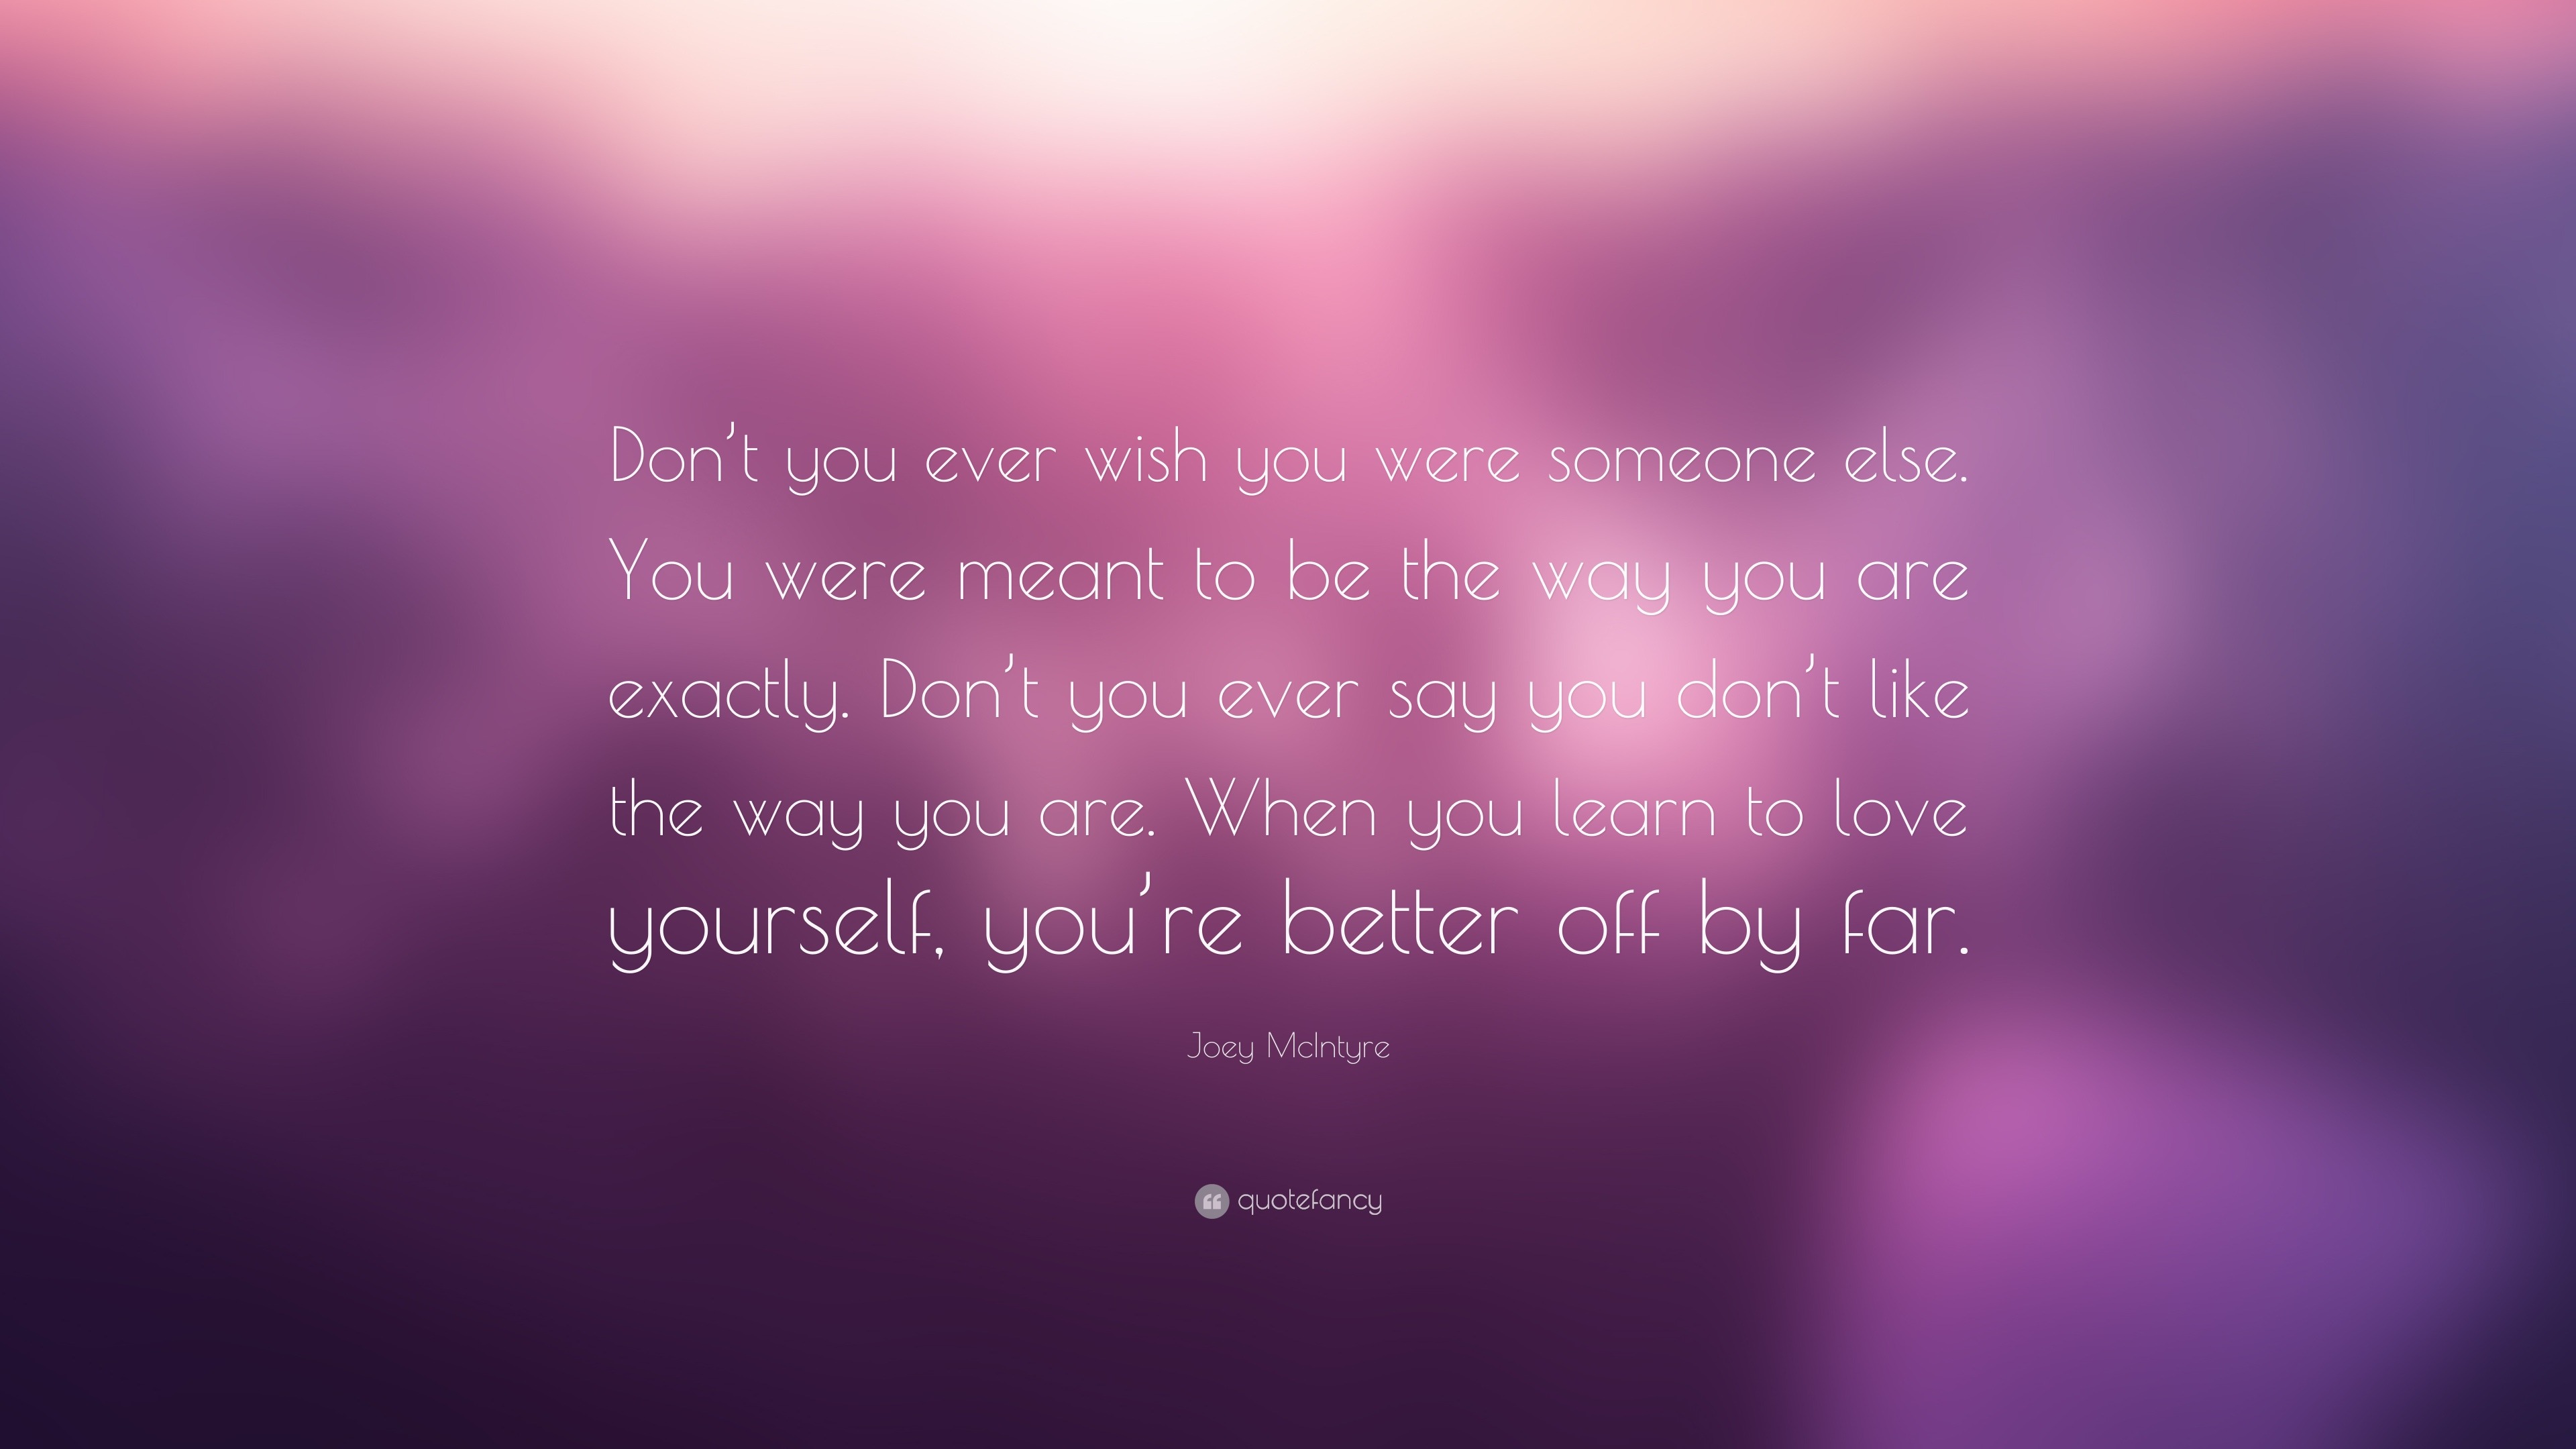 Joey McIntyre Quote: “Don’t you ever wish you were someone else. You ...